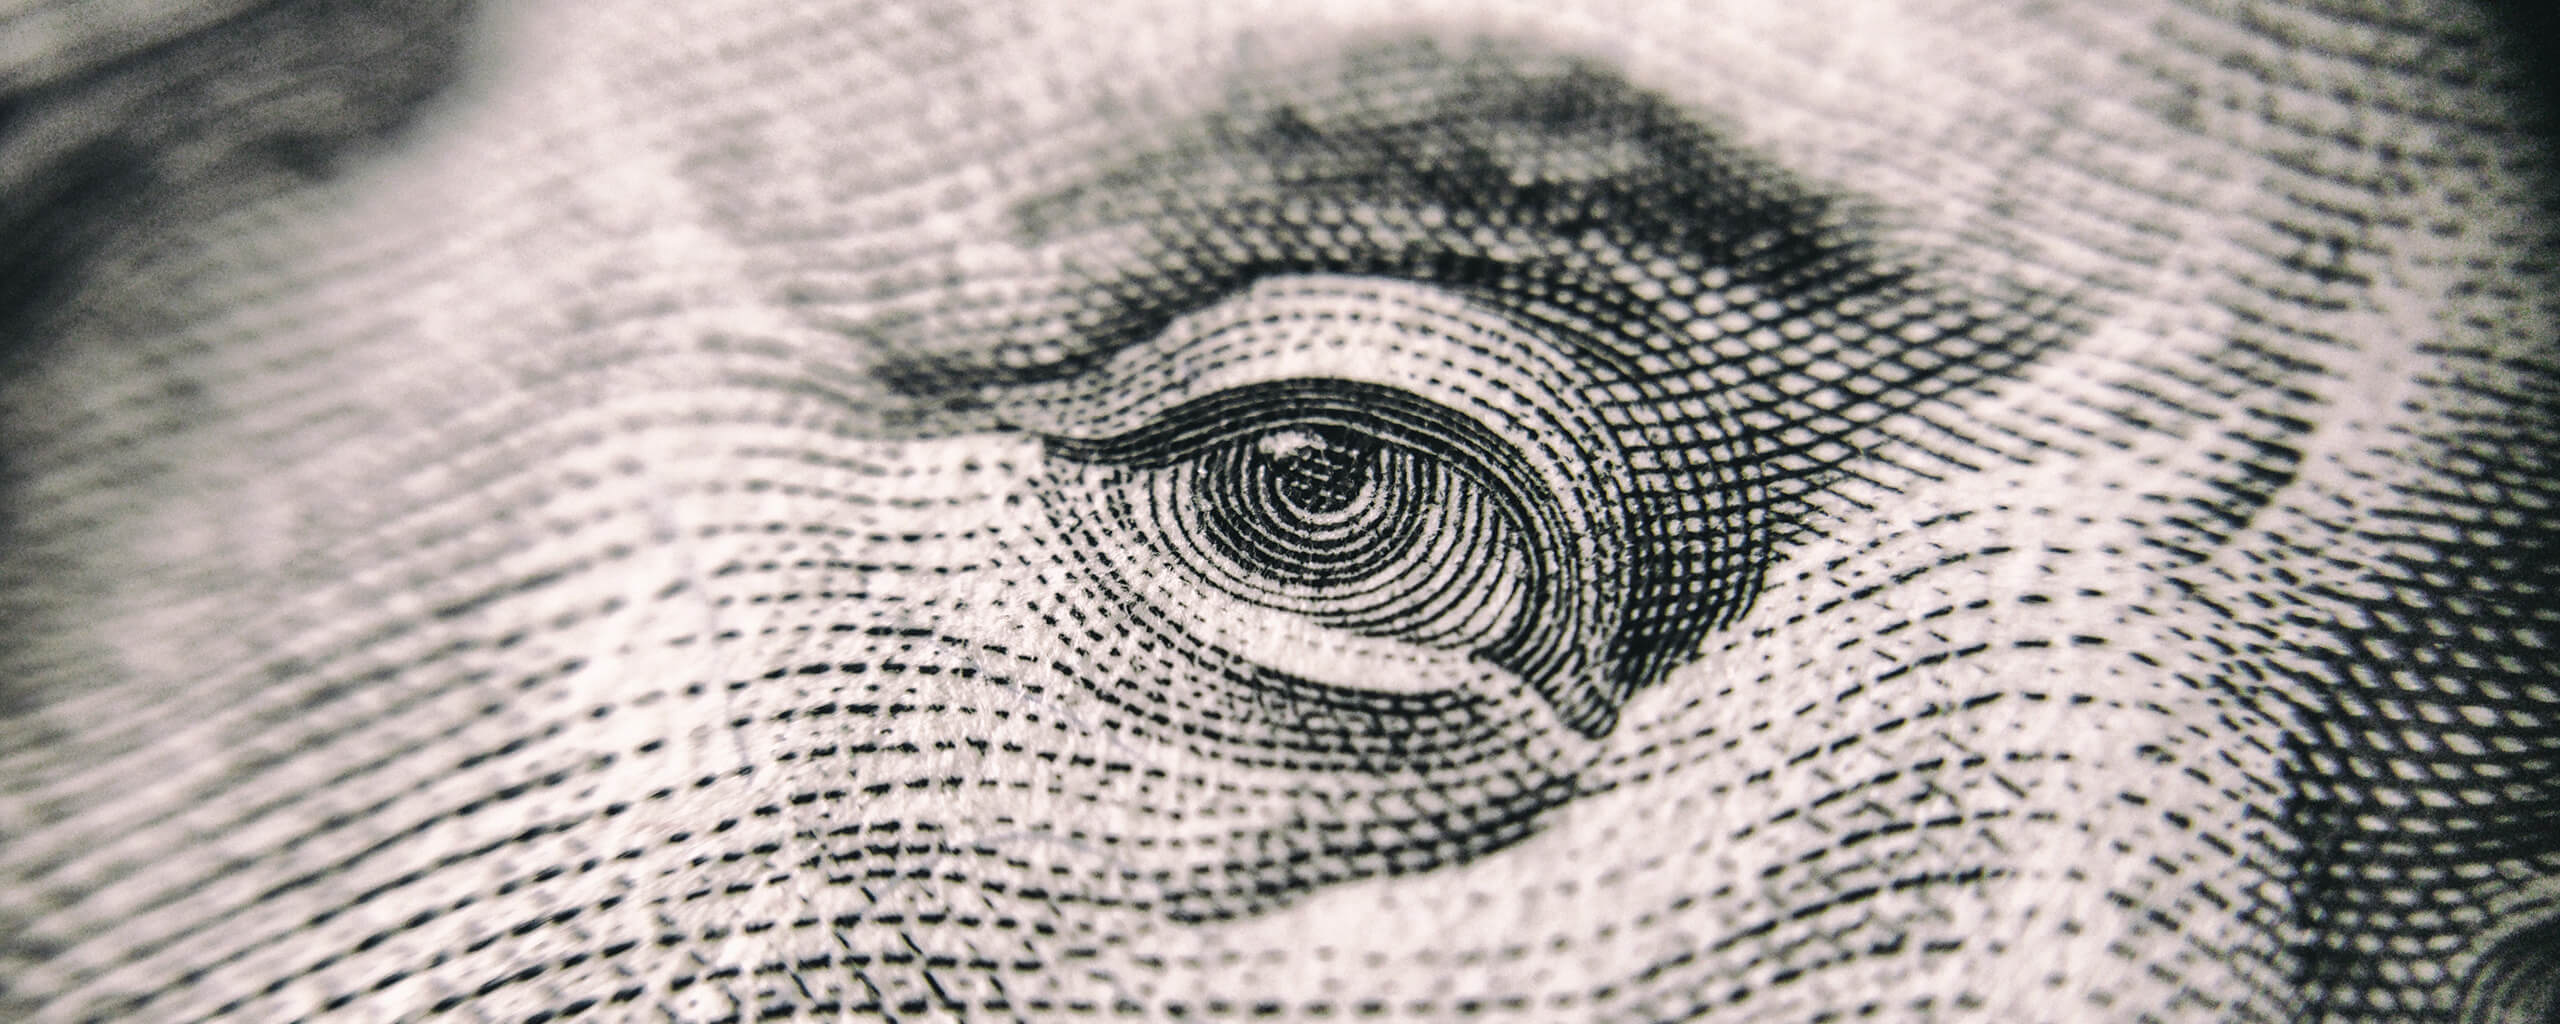 cropped eye from us dollar banknote